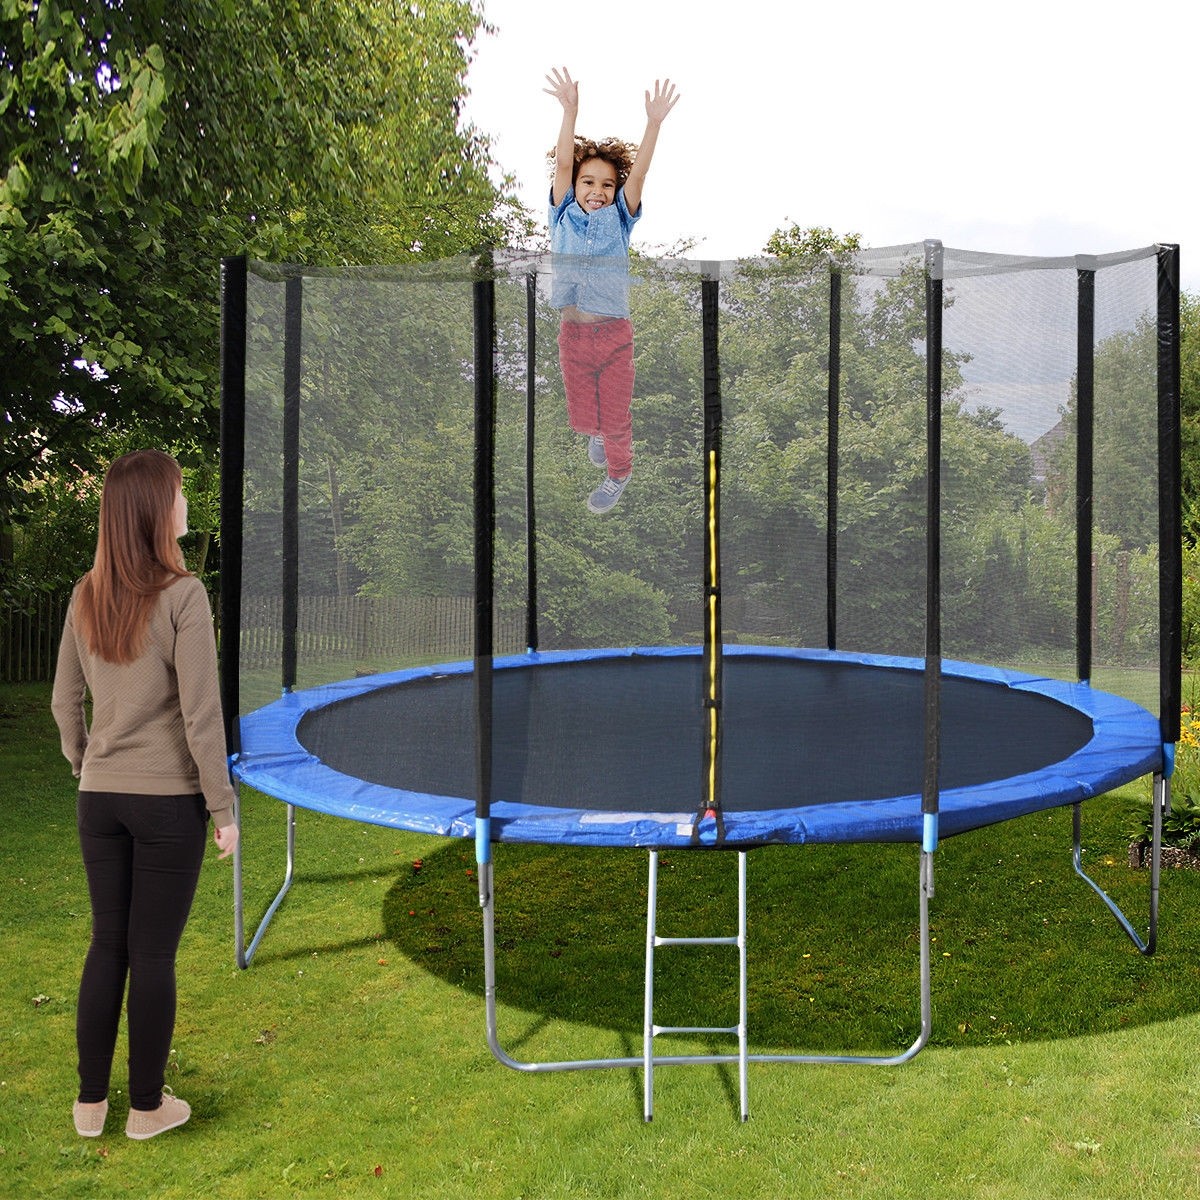 14 In. Trampoline Combo W / Safety Enclosure Net, Spring Pad And Ladder